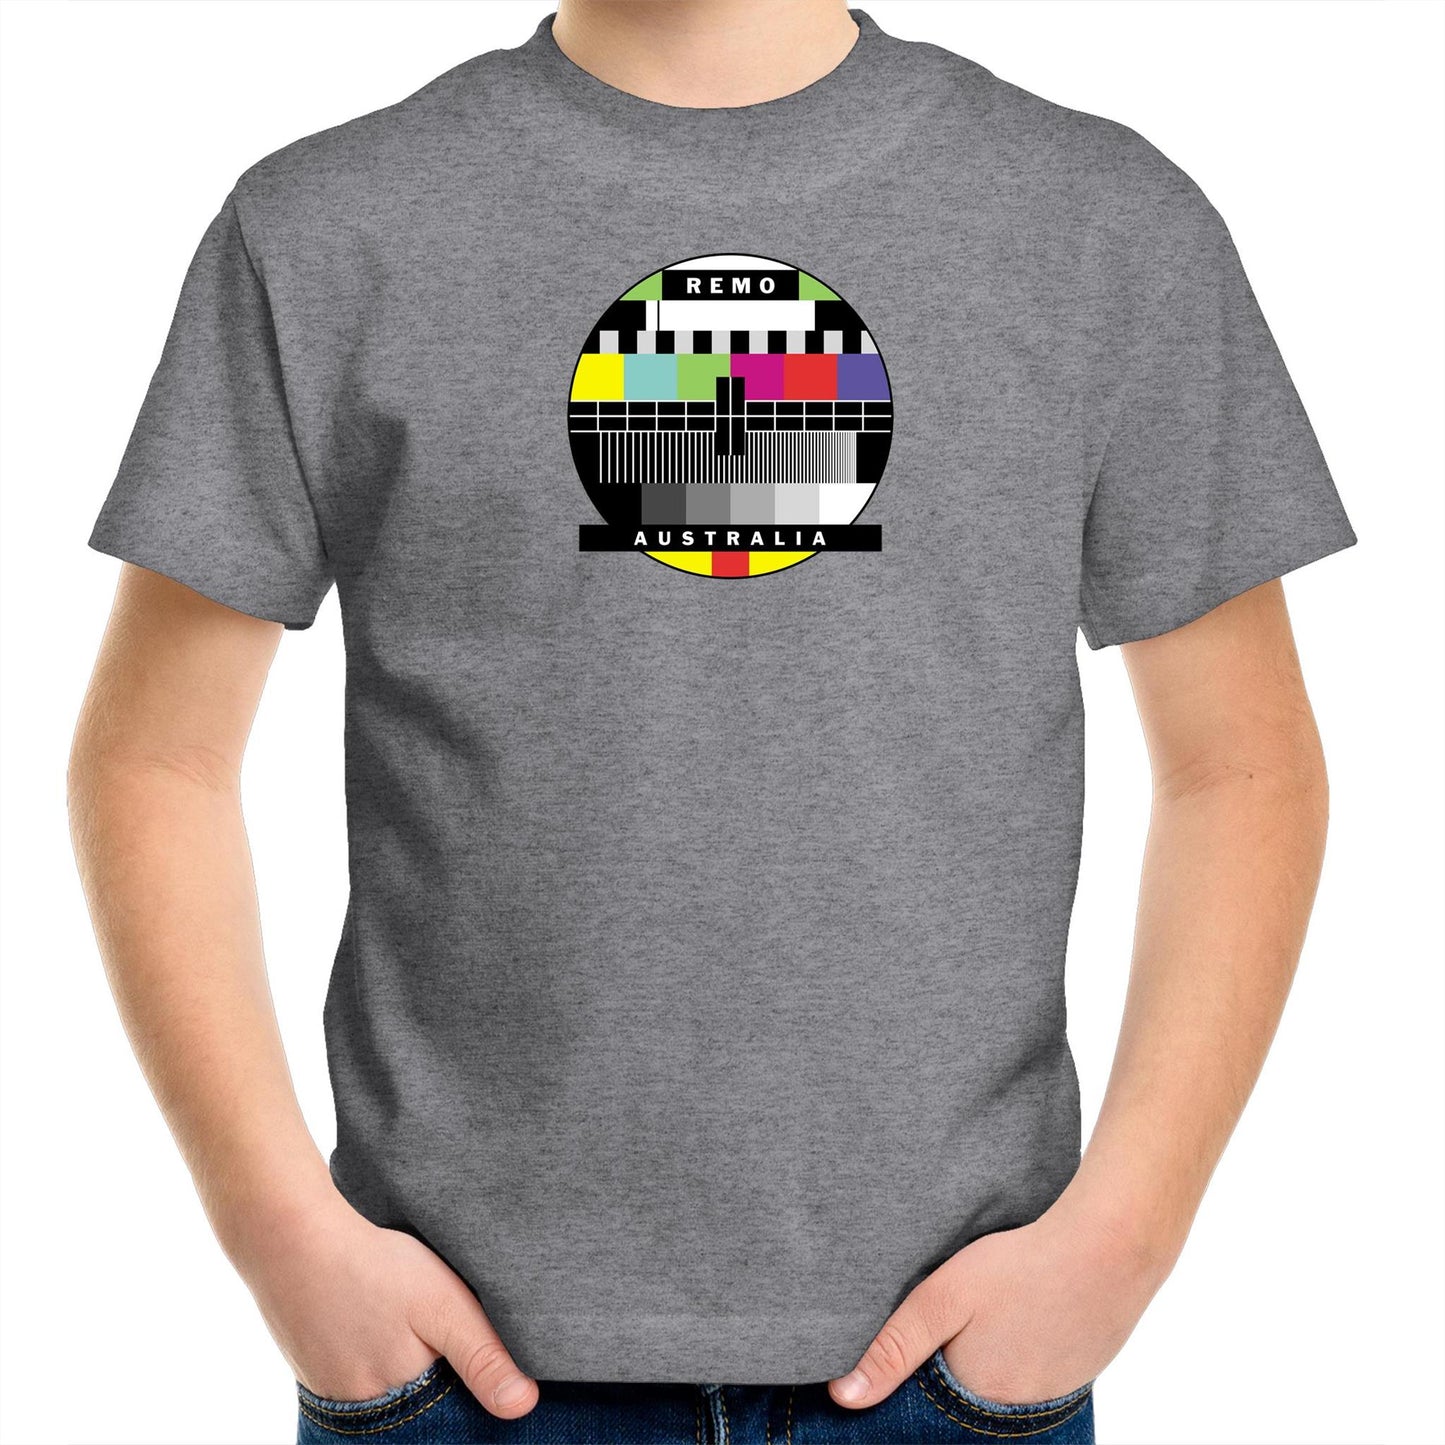 REMO TV T Shirts for Kids